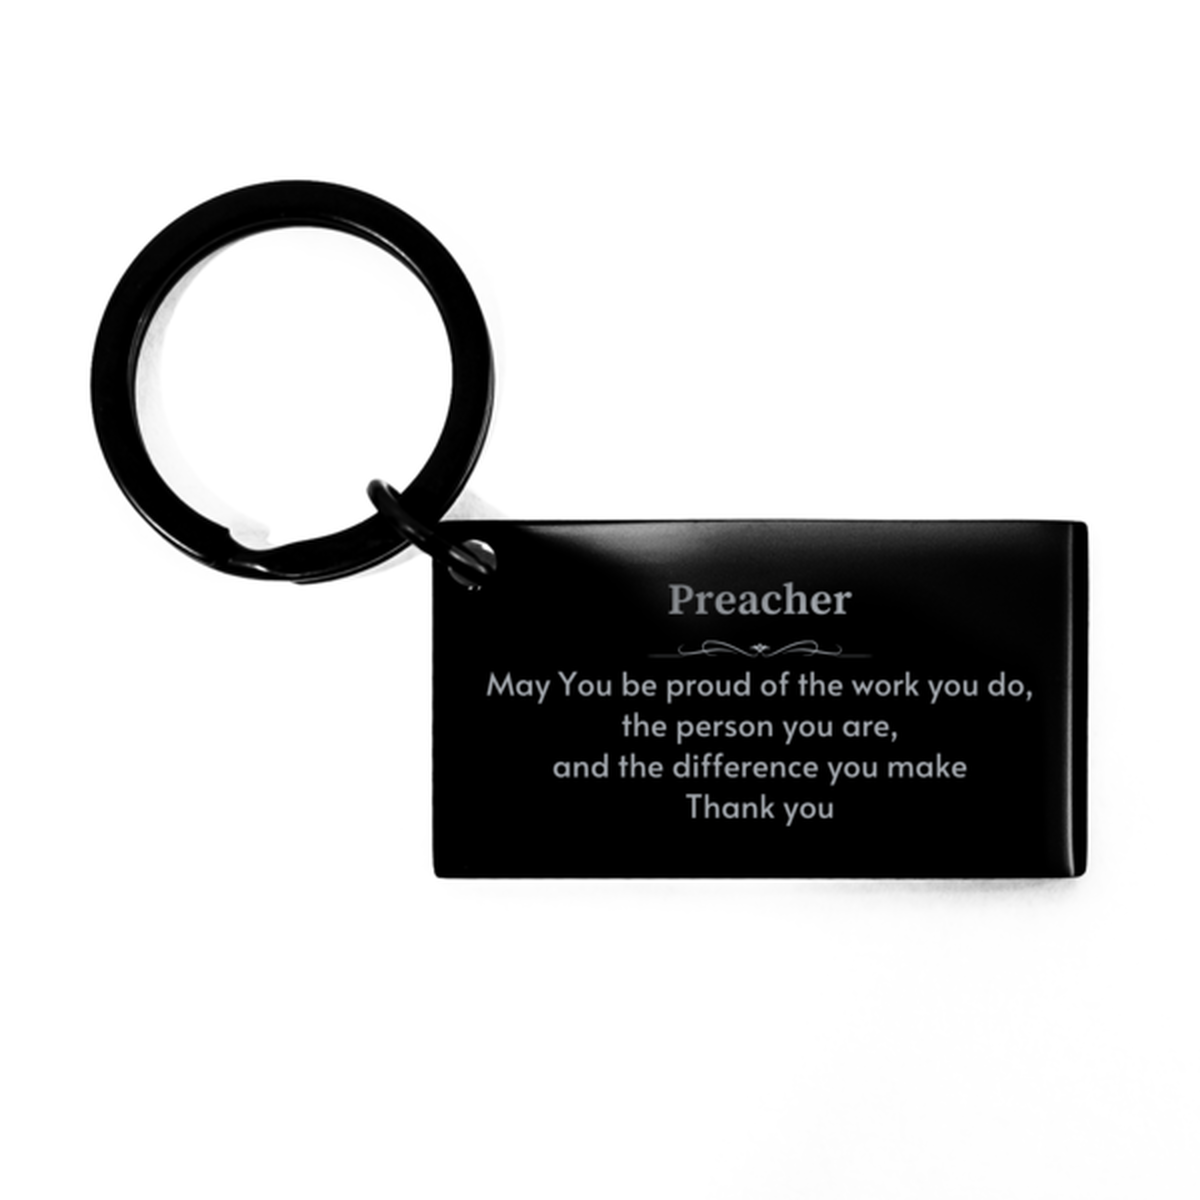 Heartwarming Keychain Retirement Coworkers Gifts for Preacher, Server May You be proud of the work you do, the person you are Gifts for Boss Men Women Friends